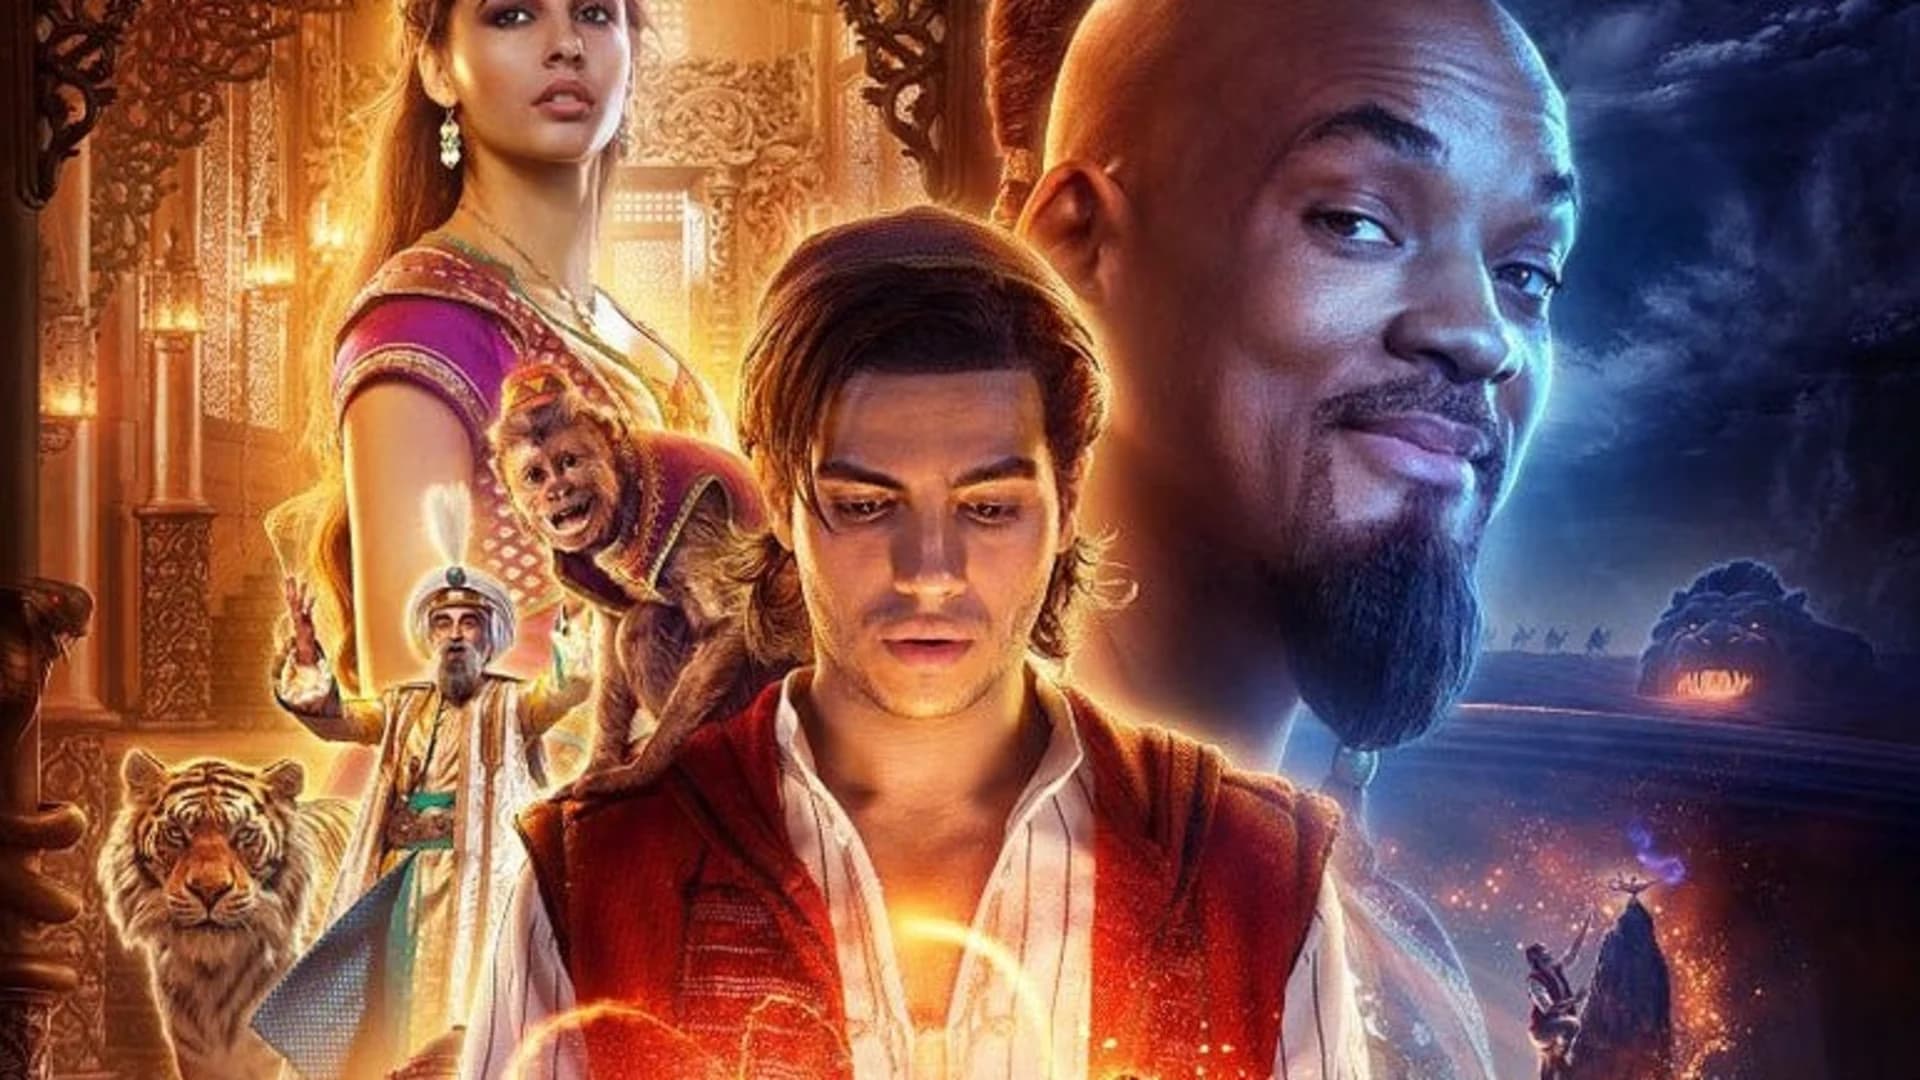 'A Whole New World' - Full-length trailer released for live-action 'Aladdin' film